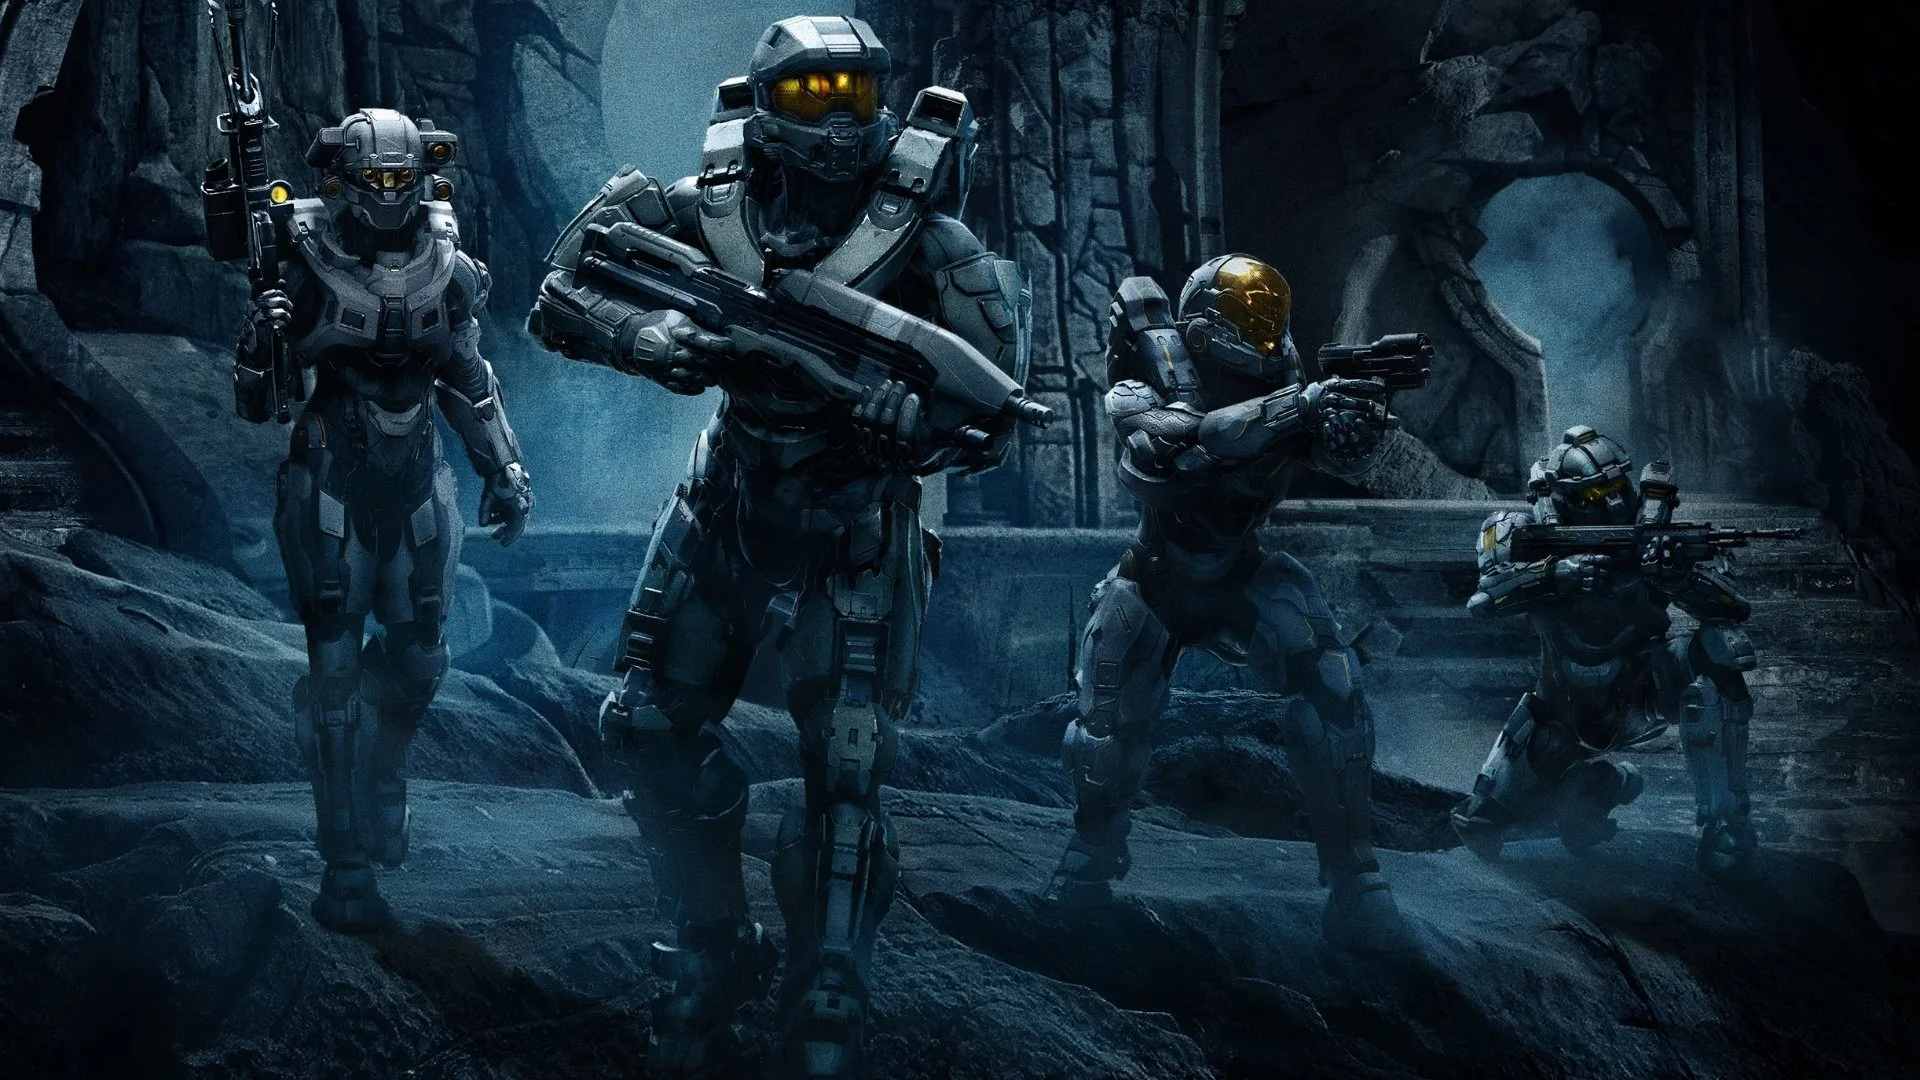 The 3rd wallpaper is with Halo 5 Guardians Team Chief